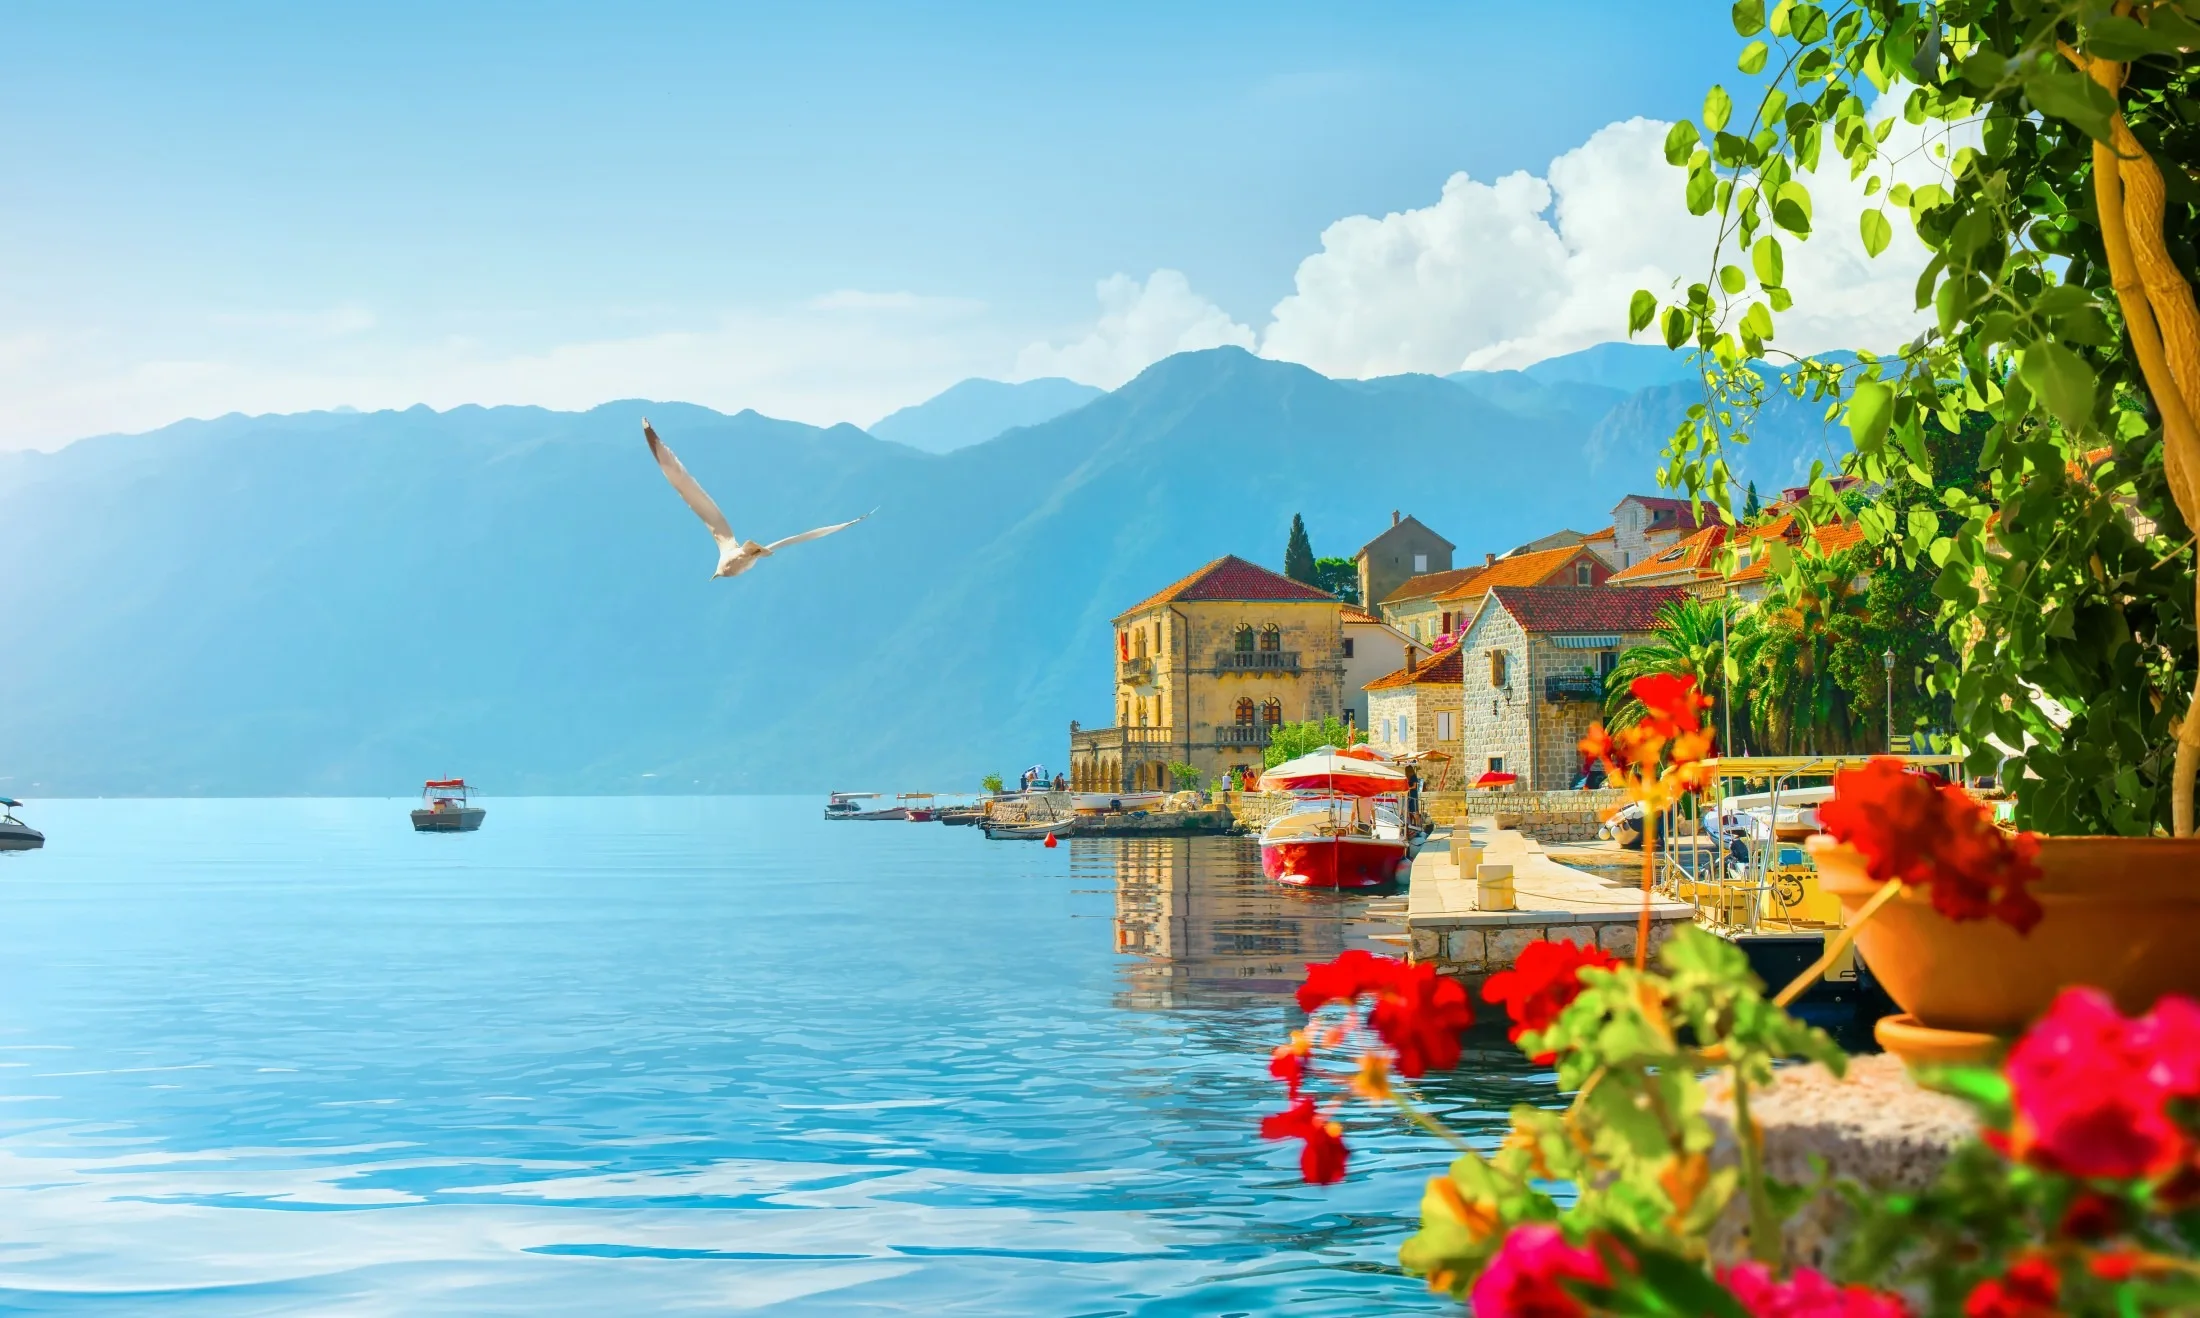 A photo of Perast in Montenegro